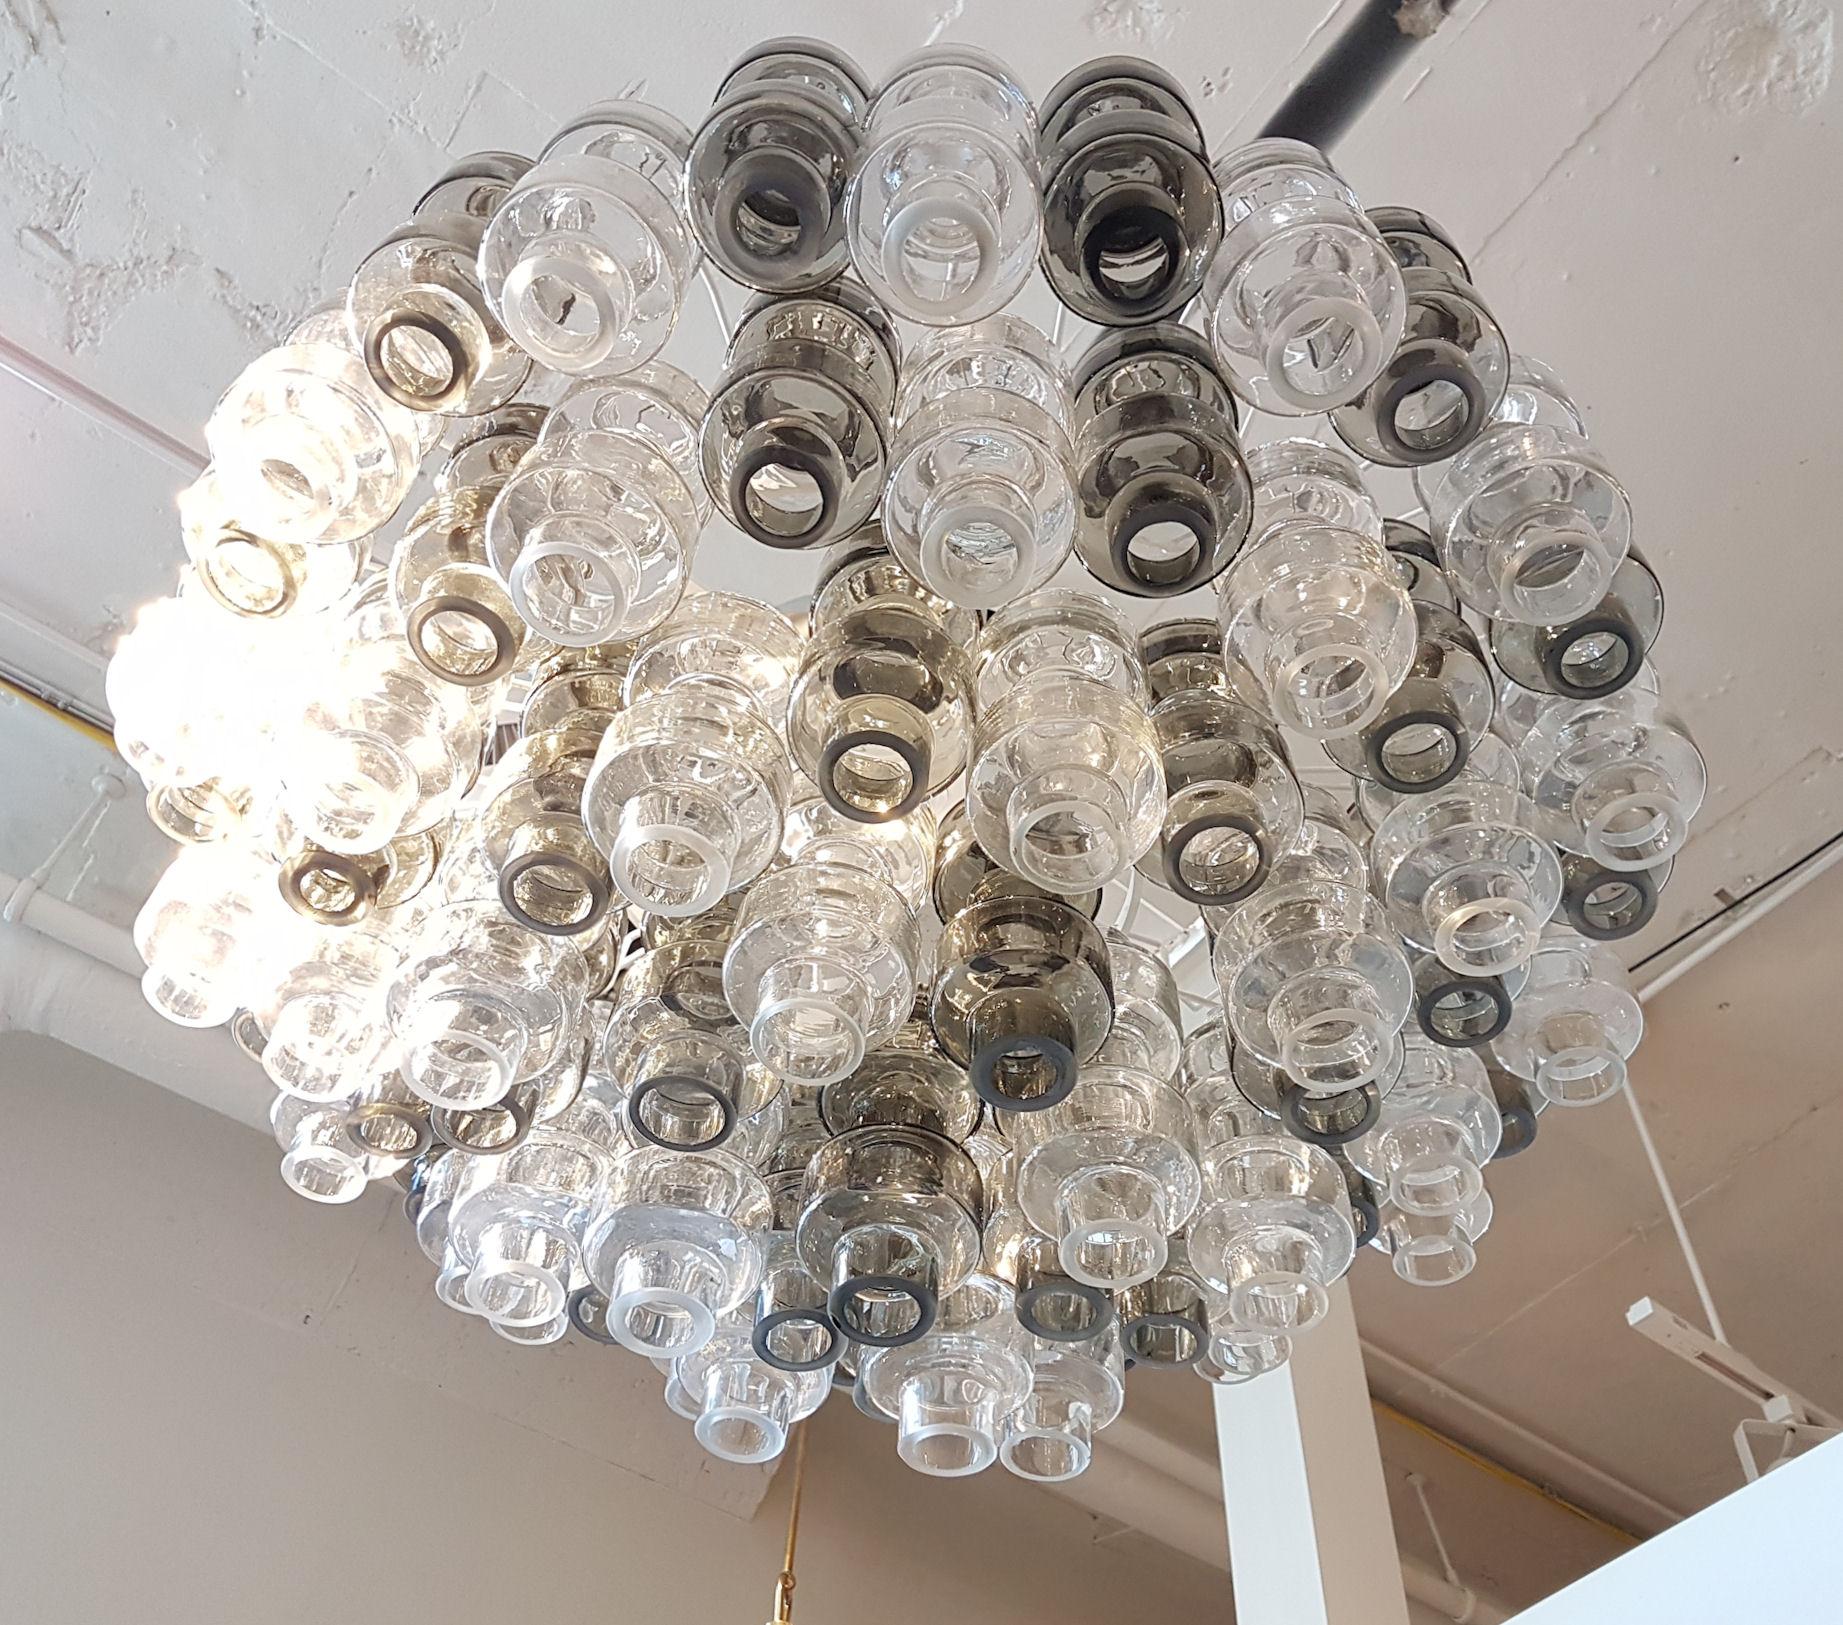 Large clear and brown Murano glass Barbell chandelier or flush mount. Mid-century modern. By Seguso Italy. 1970s.
Barbell is a geometric glass created by Seguso.
Chain & canopy in chrome (newly added) 20 in. high, frame painted antique white.
Height